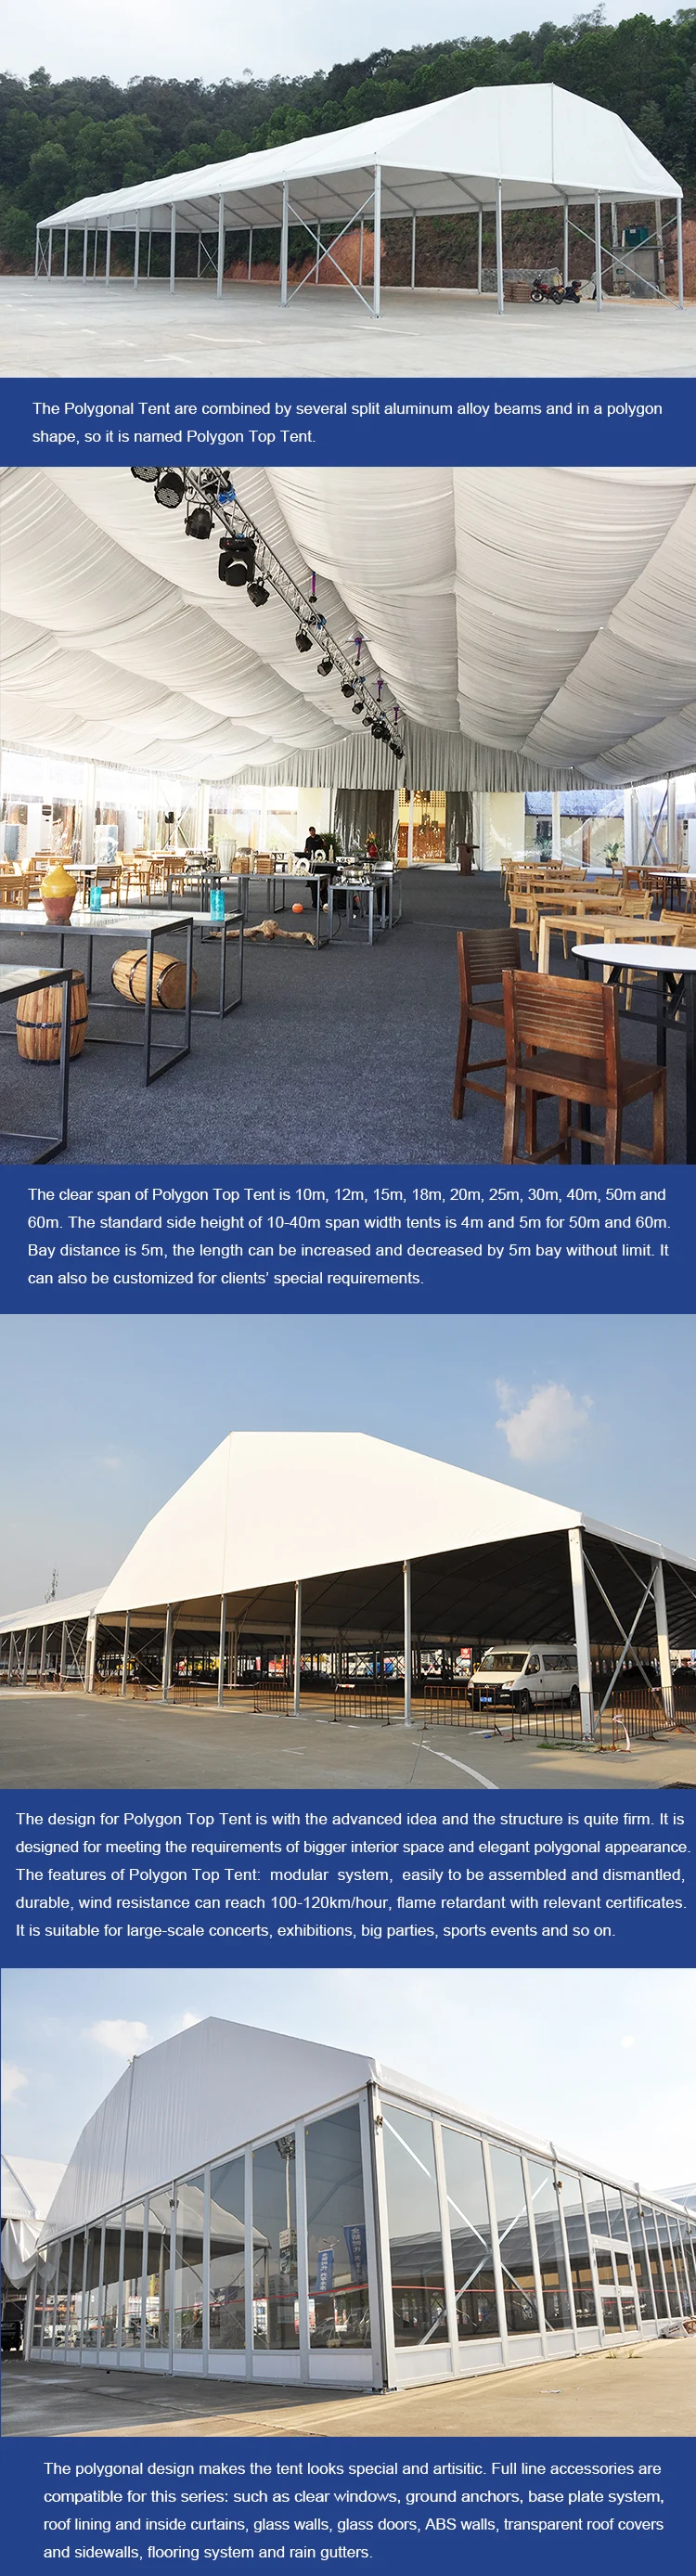 COSCO large aluminum frame pvc coated 20x40 polygonal roof event tent